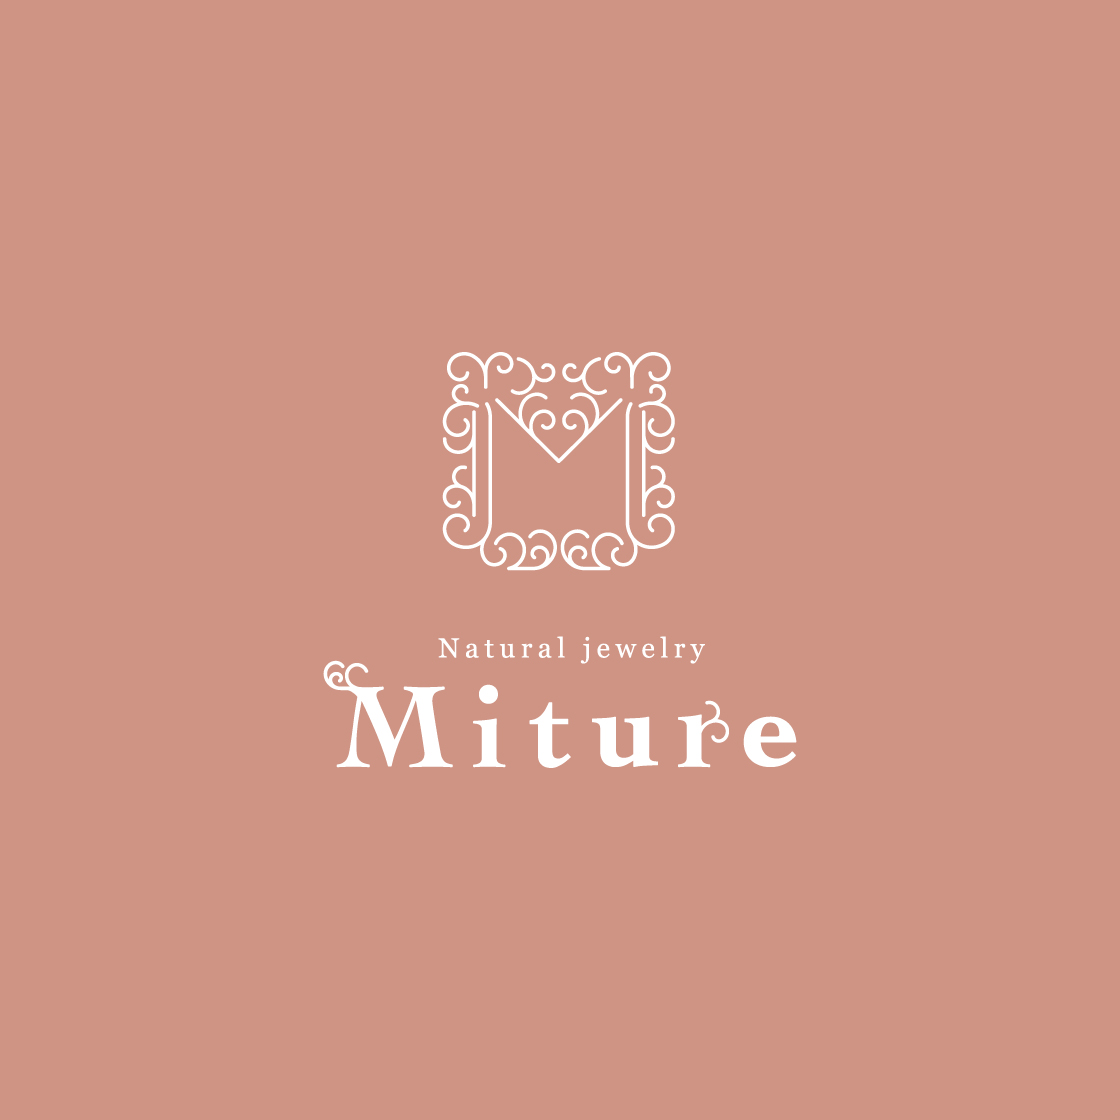 Natural jewelry Miture 様